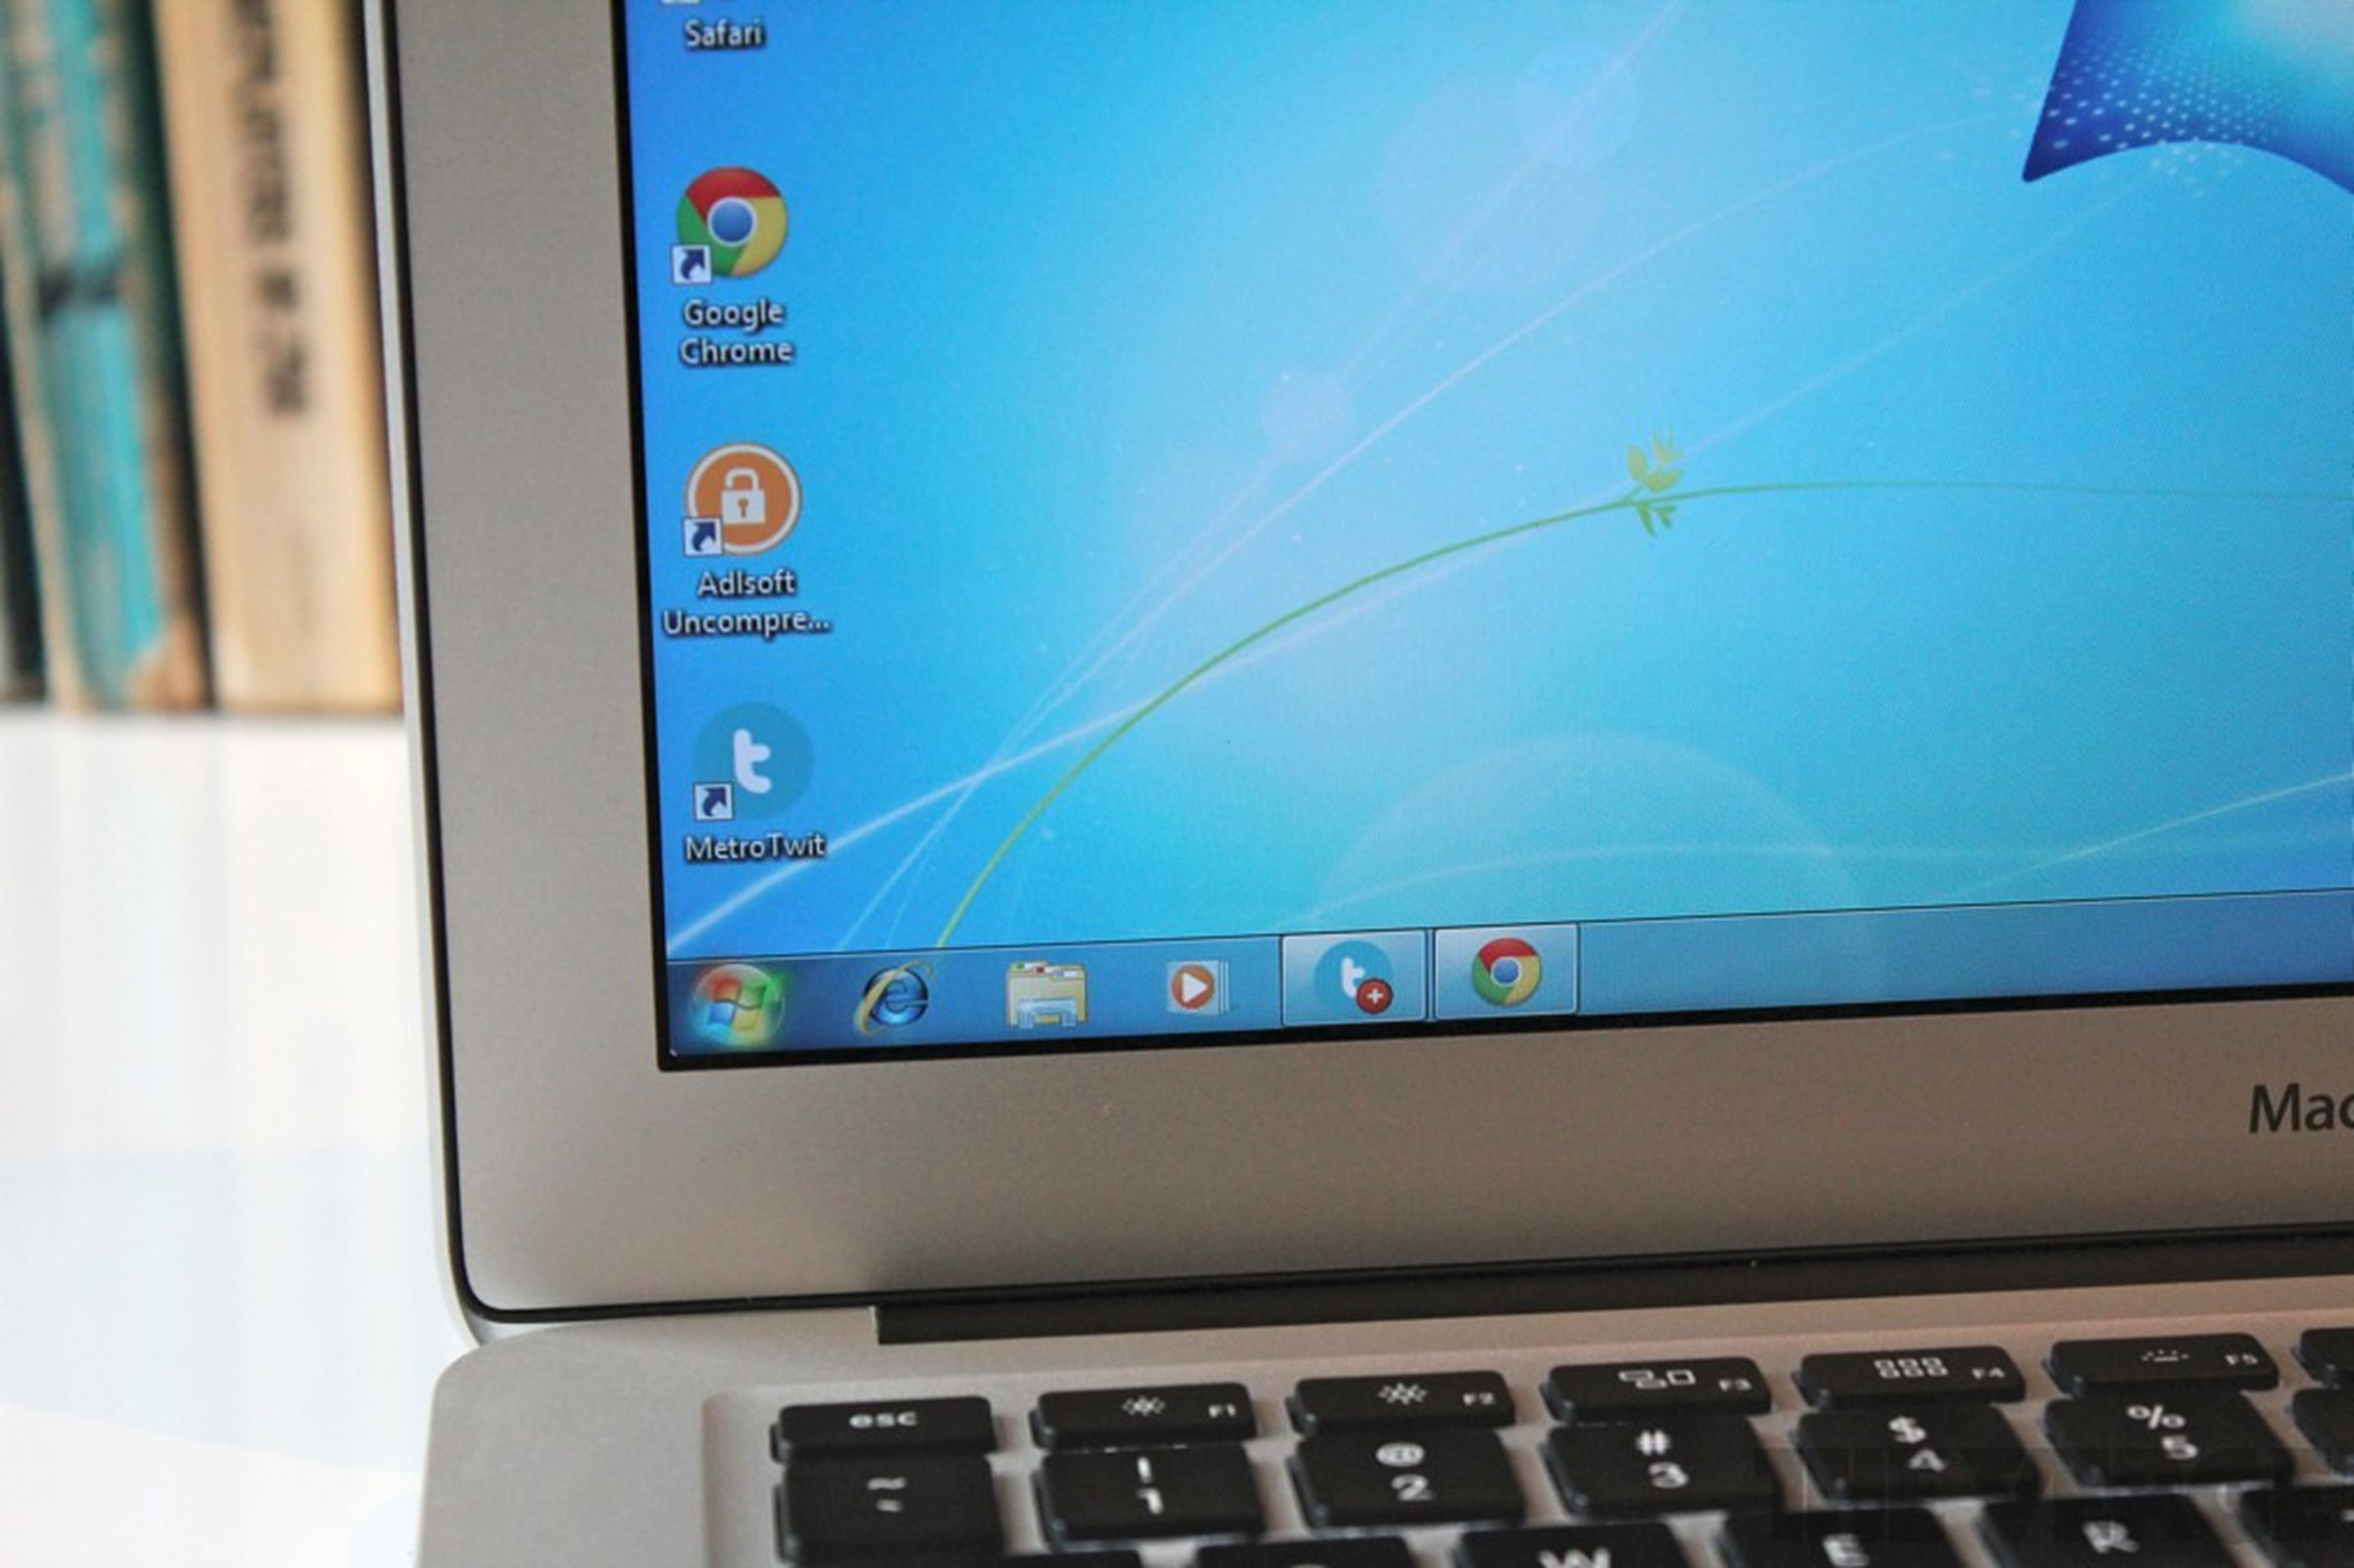 MacBook Air with Windows 7 review 